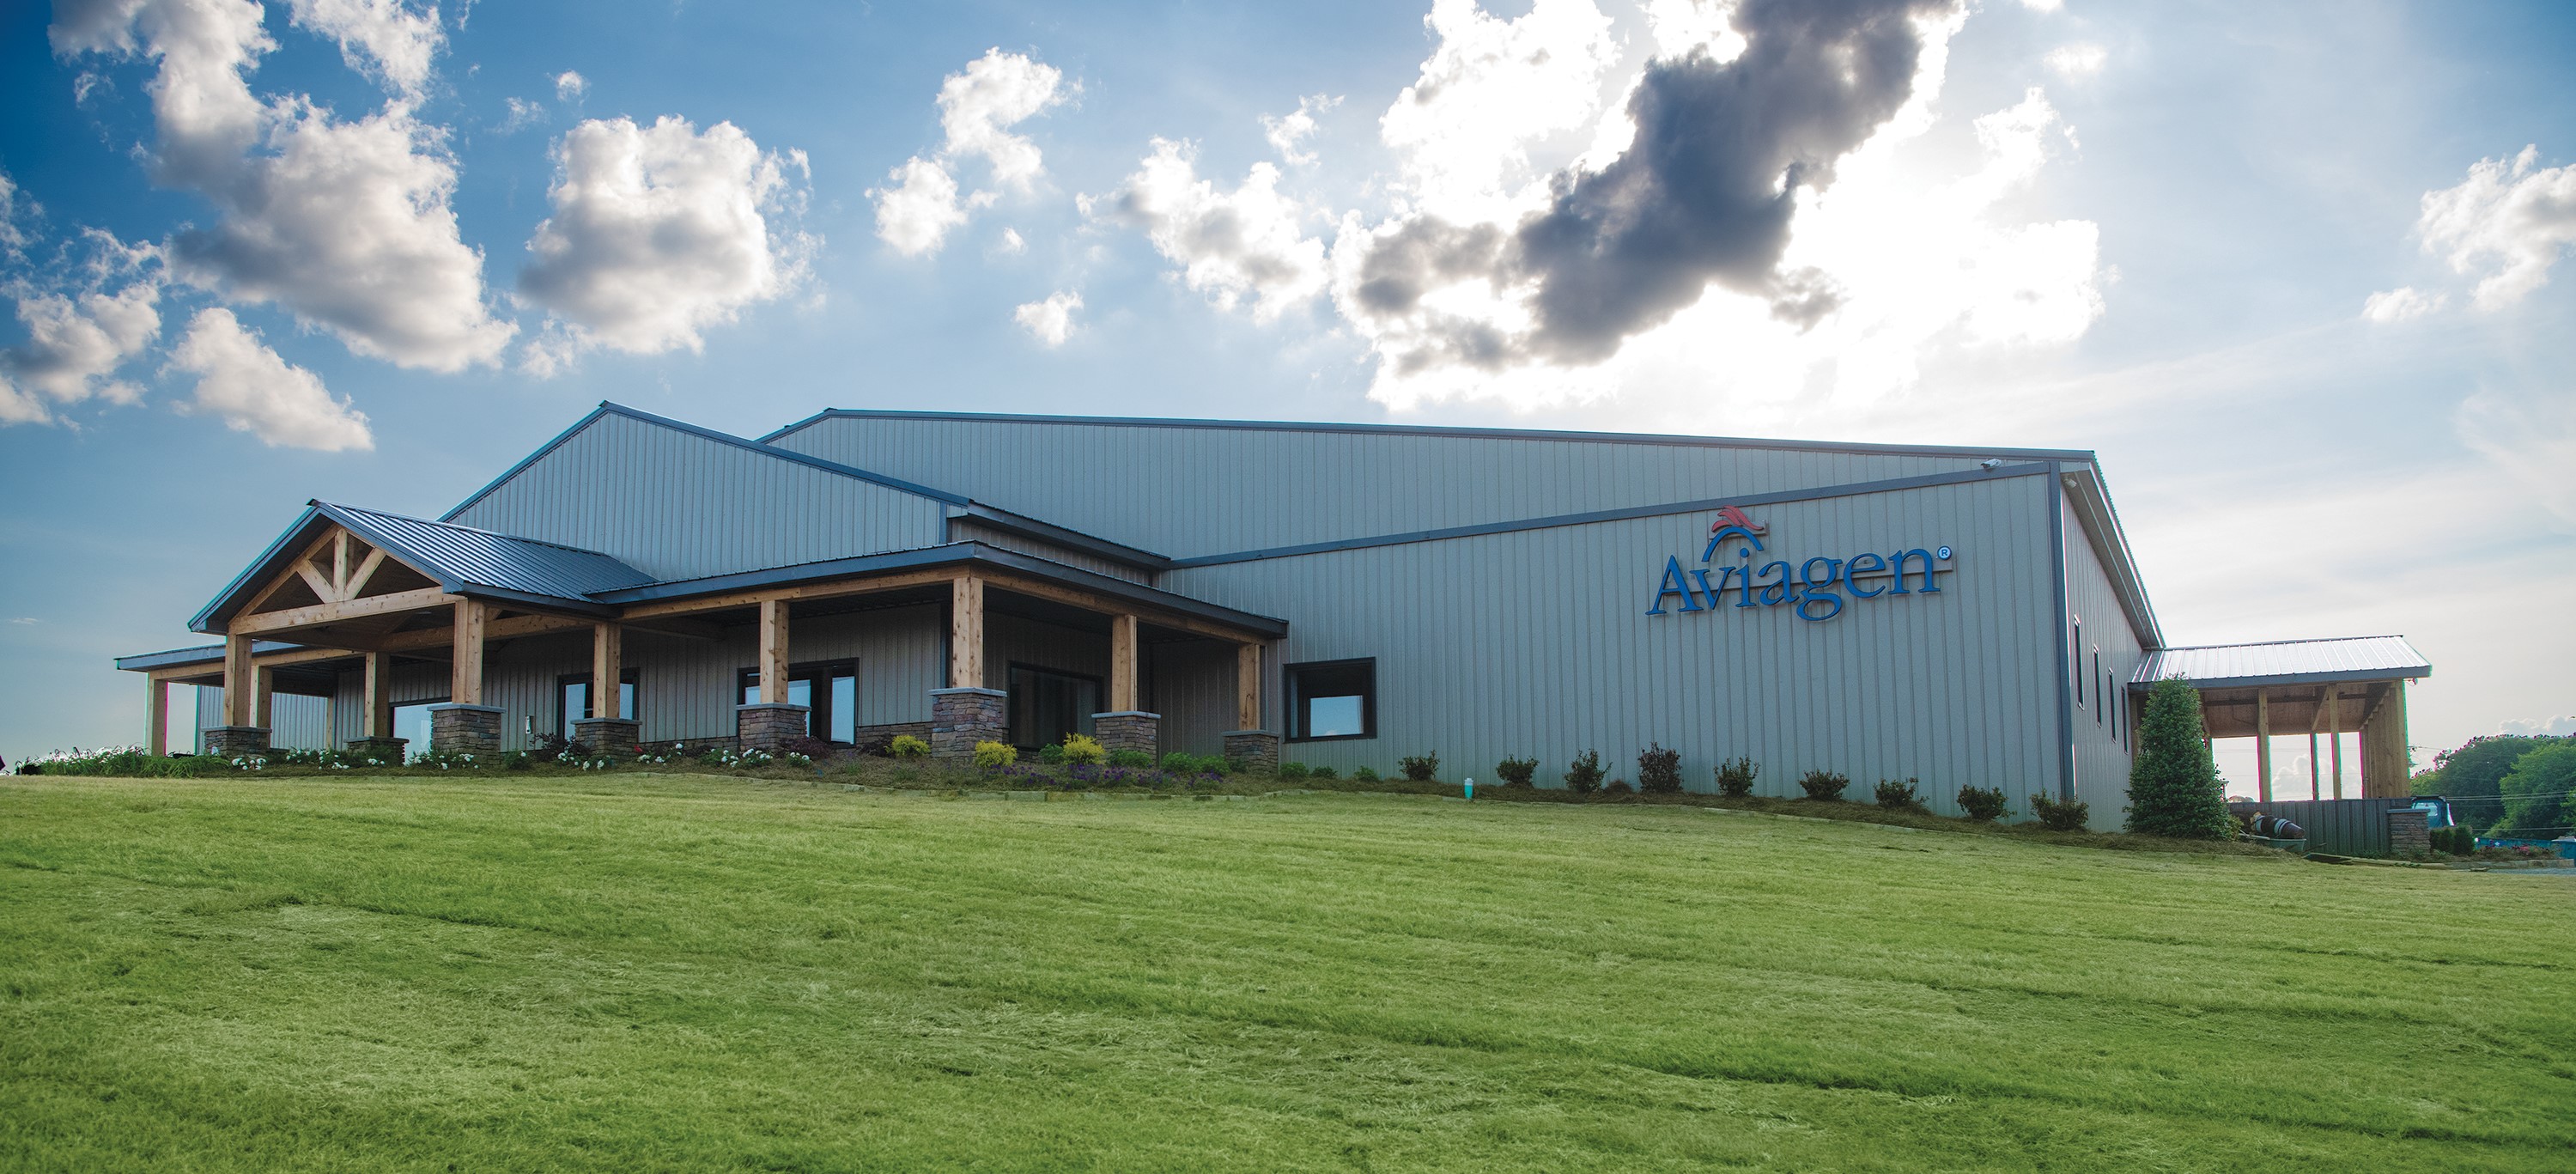 The new Aviagen Research and Training Center